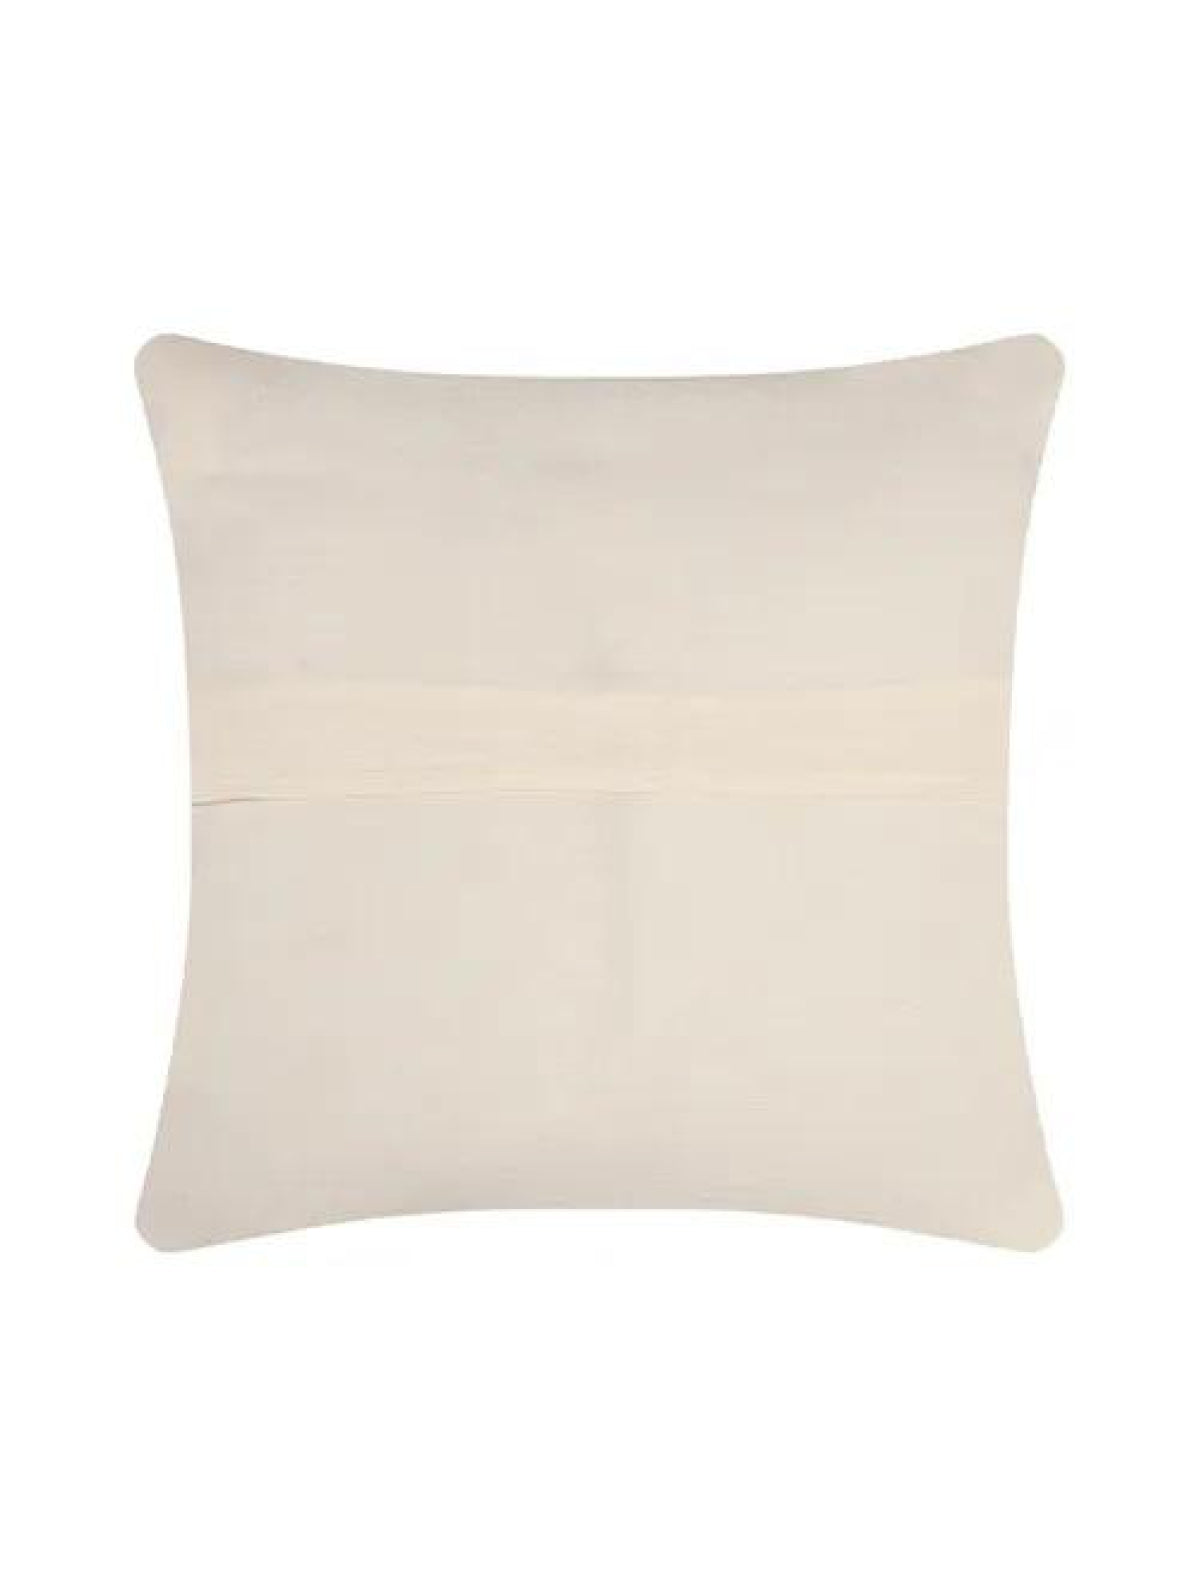 Opposite White Yellow Cushion Covers (Set of 2)